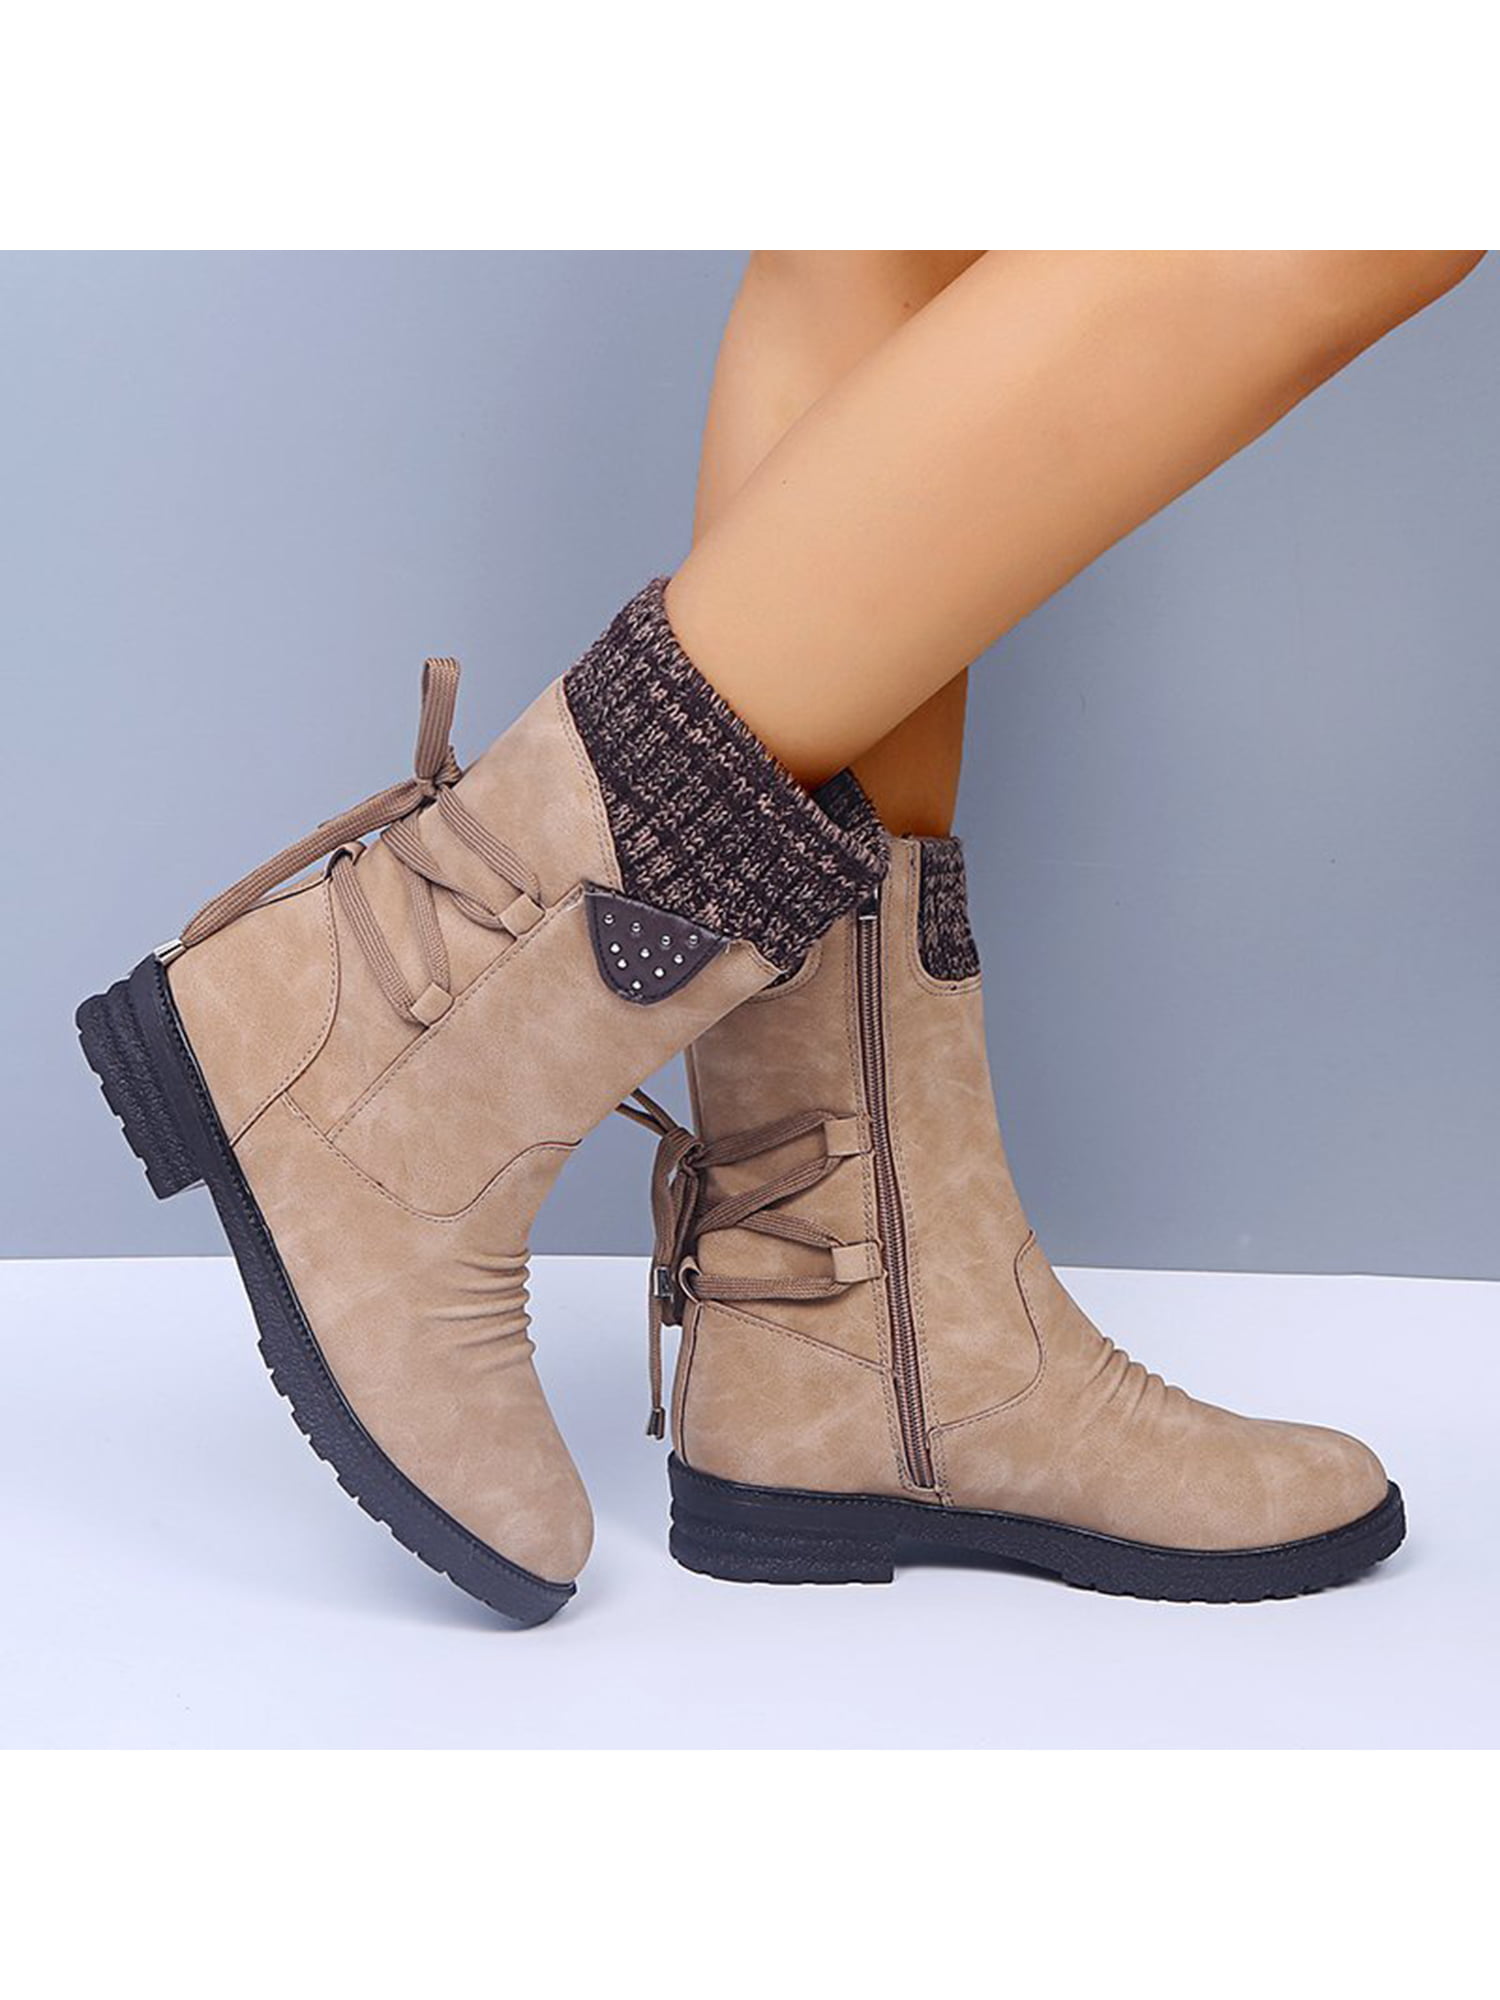 Details about   Women Ladies Ankle Boots Winter Warm Comfort Slipper Round Toe Low Heel Shoes D